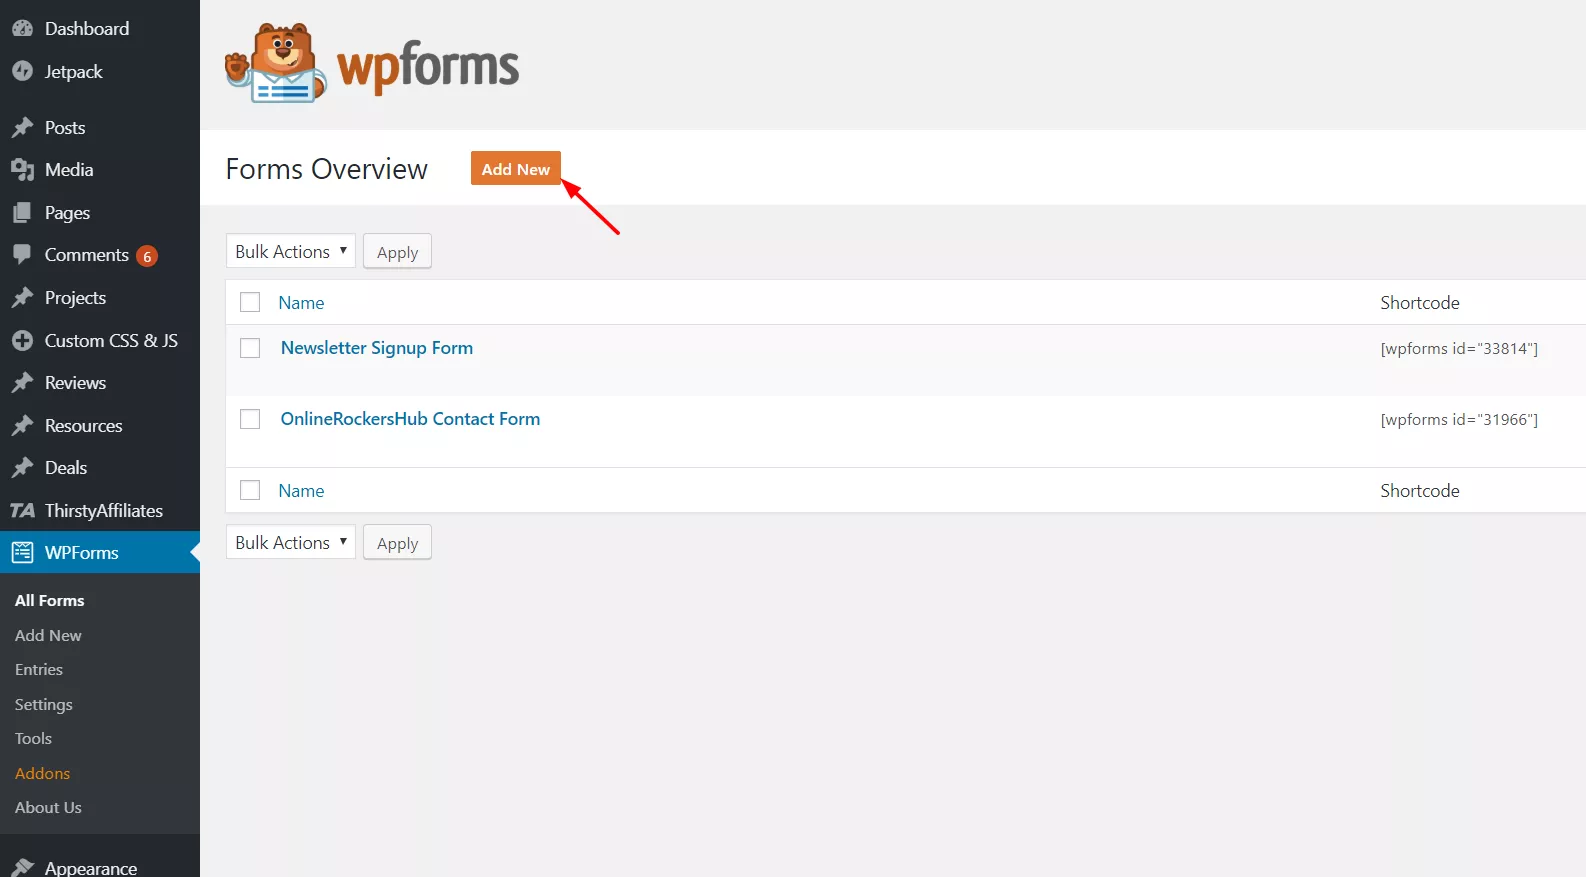 Add new forms in wpforms